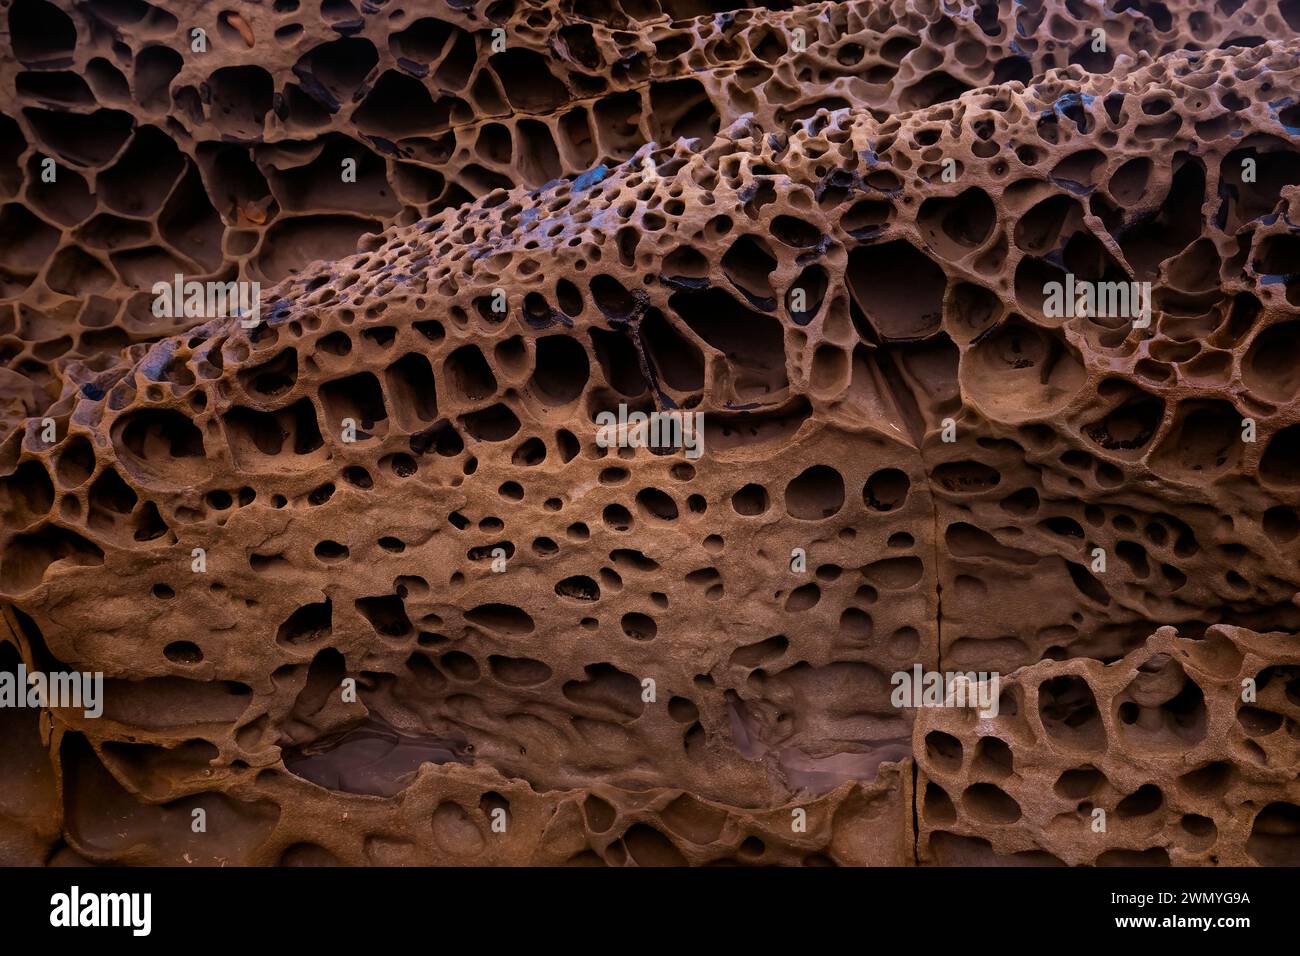 The image captures the intricate erosional patterns of rocks coated with biofilm bacteria at the beach of the old mine of Llumeres in Asturias, showca Stock Photo